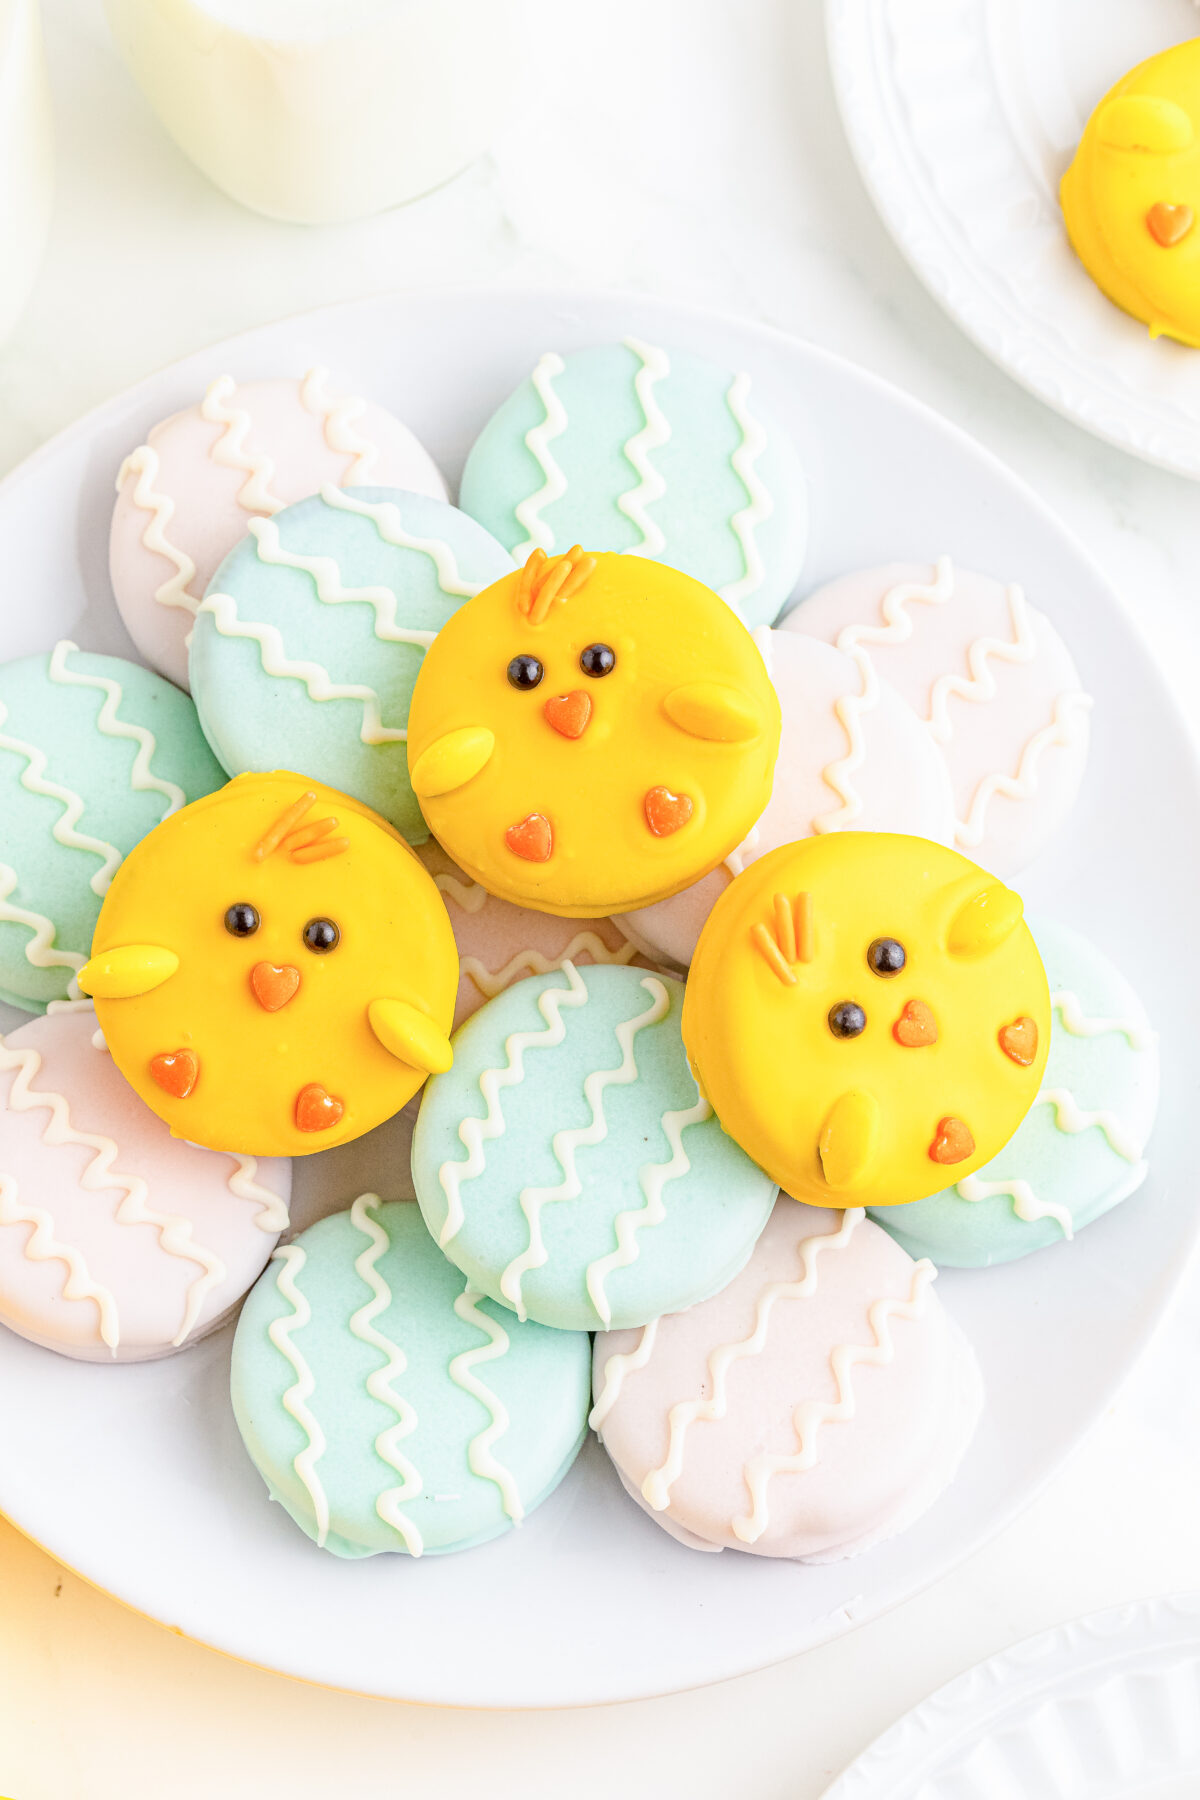 Add some fun to your Easter celebration with this easy-to-make and delicious Easter Chocolate Covered Oreo recipe – featuring chicks and eggs!